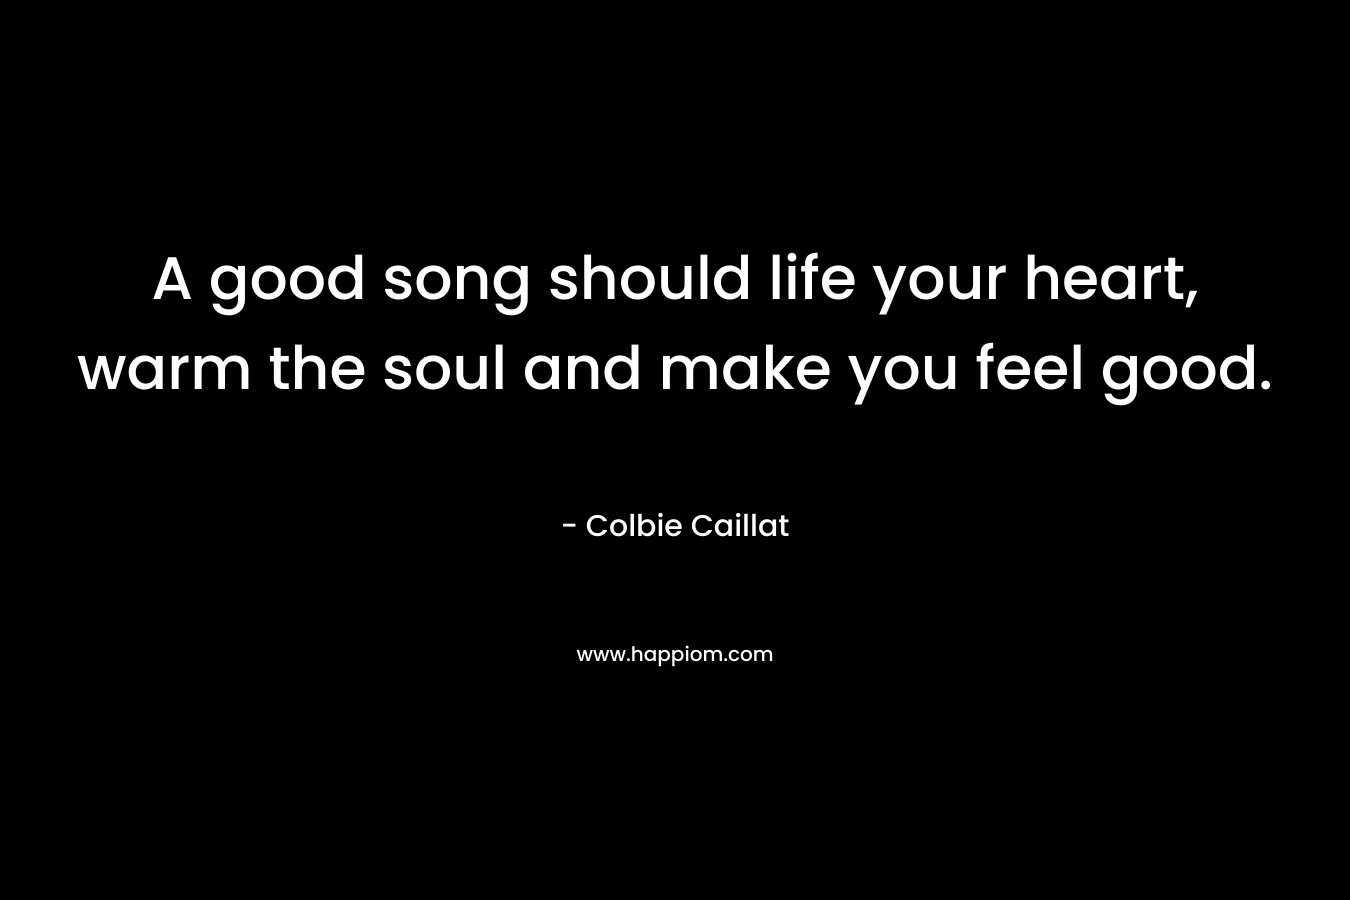 A good song should life your heart, warm the soul and make you feel good.